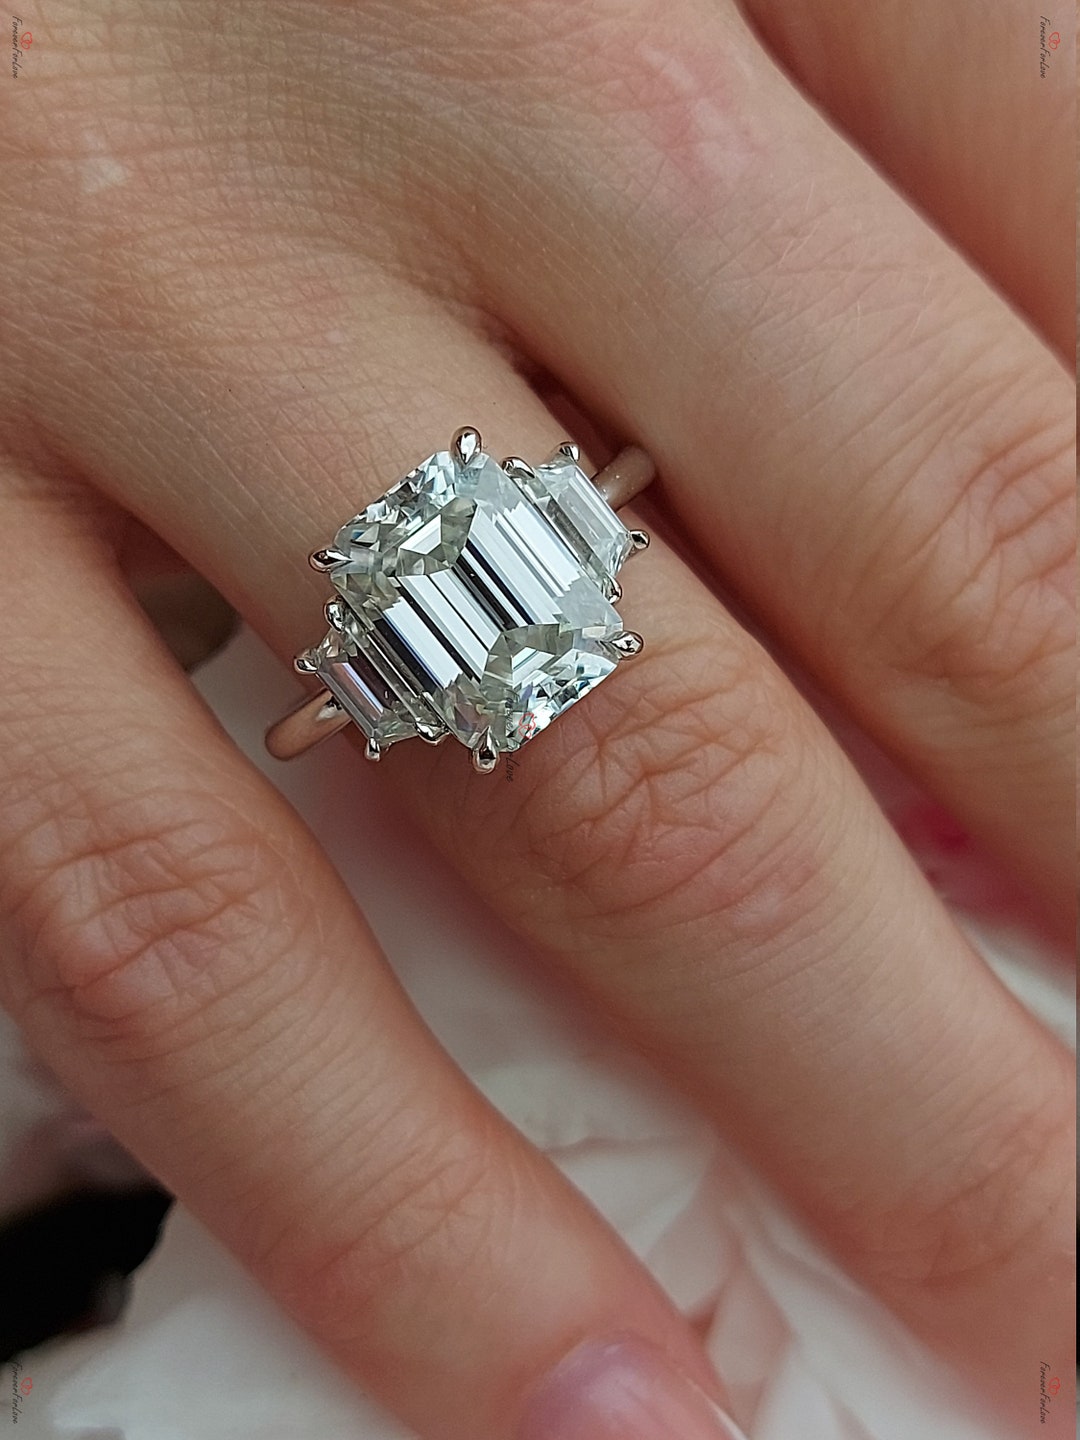 5 carat diamond stunner! Engagement ring featuring halo and cushion cut  diamond | Jewelry rings engagement, Unique engagement rings, Diamond  instagram